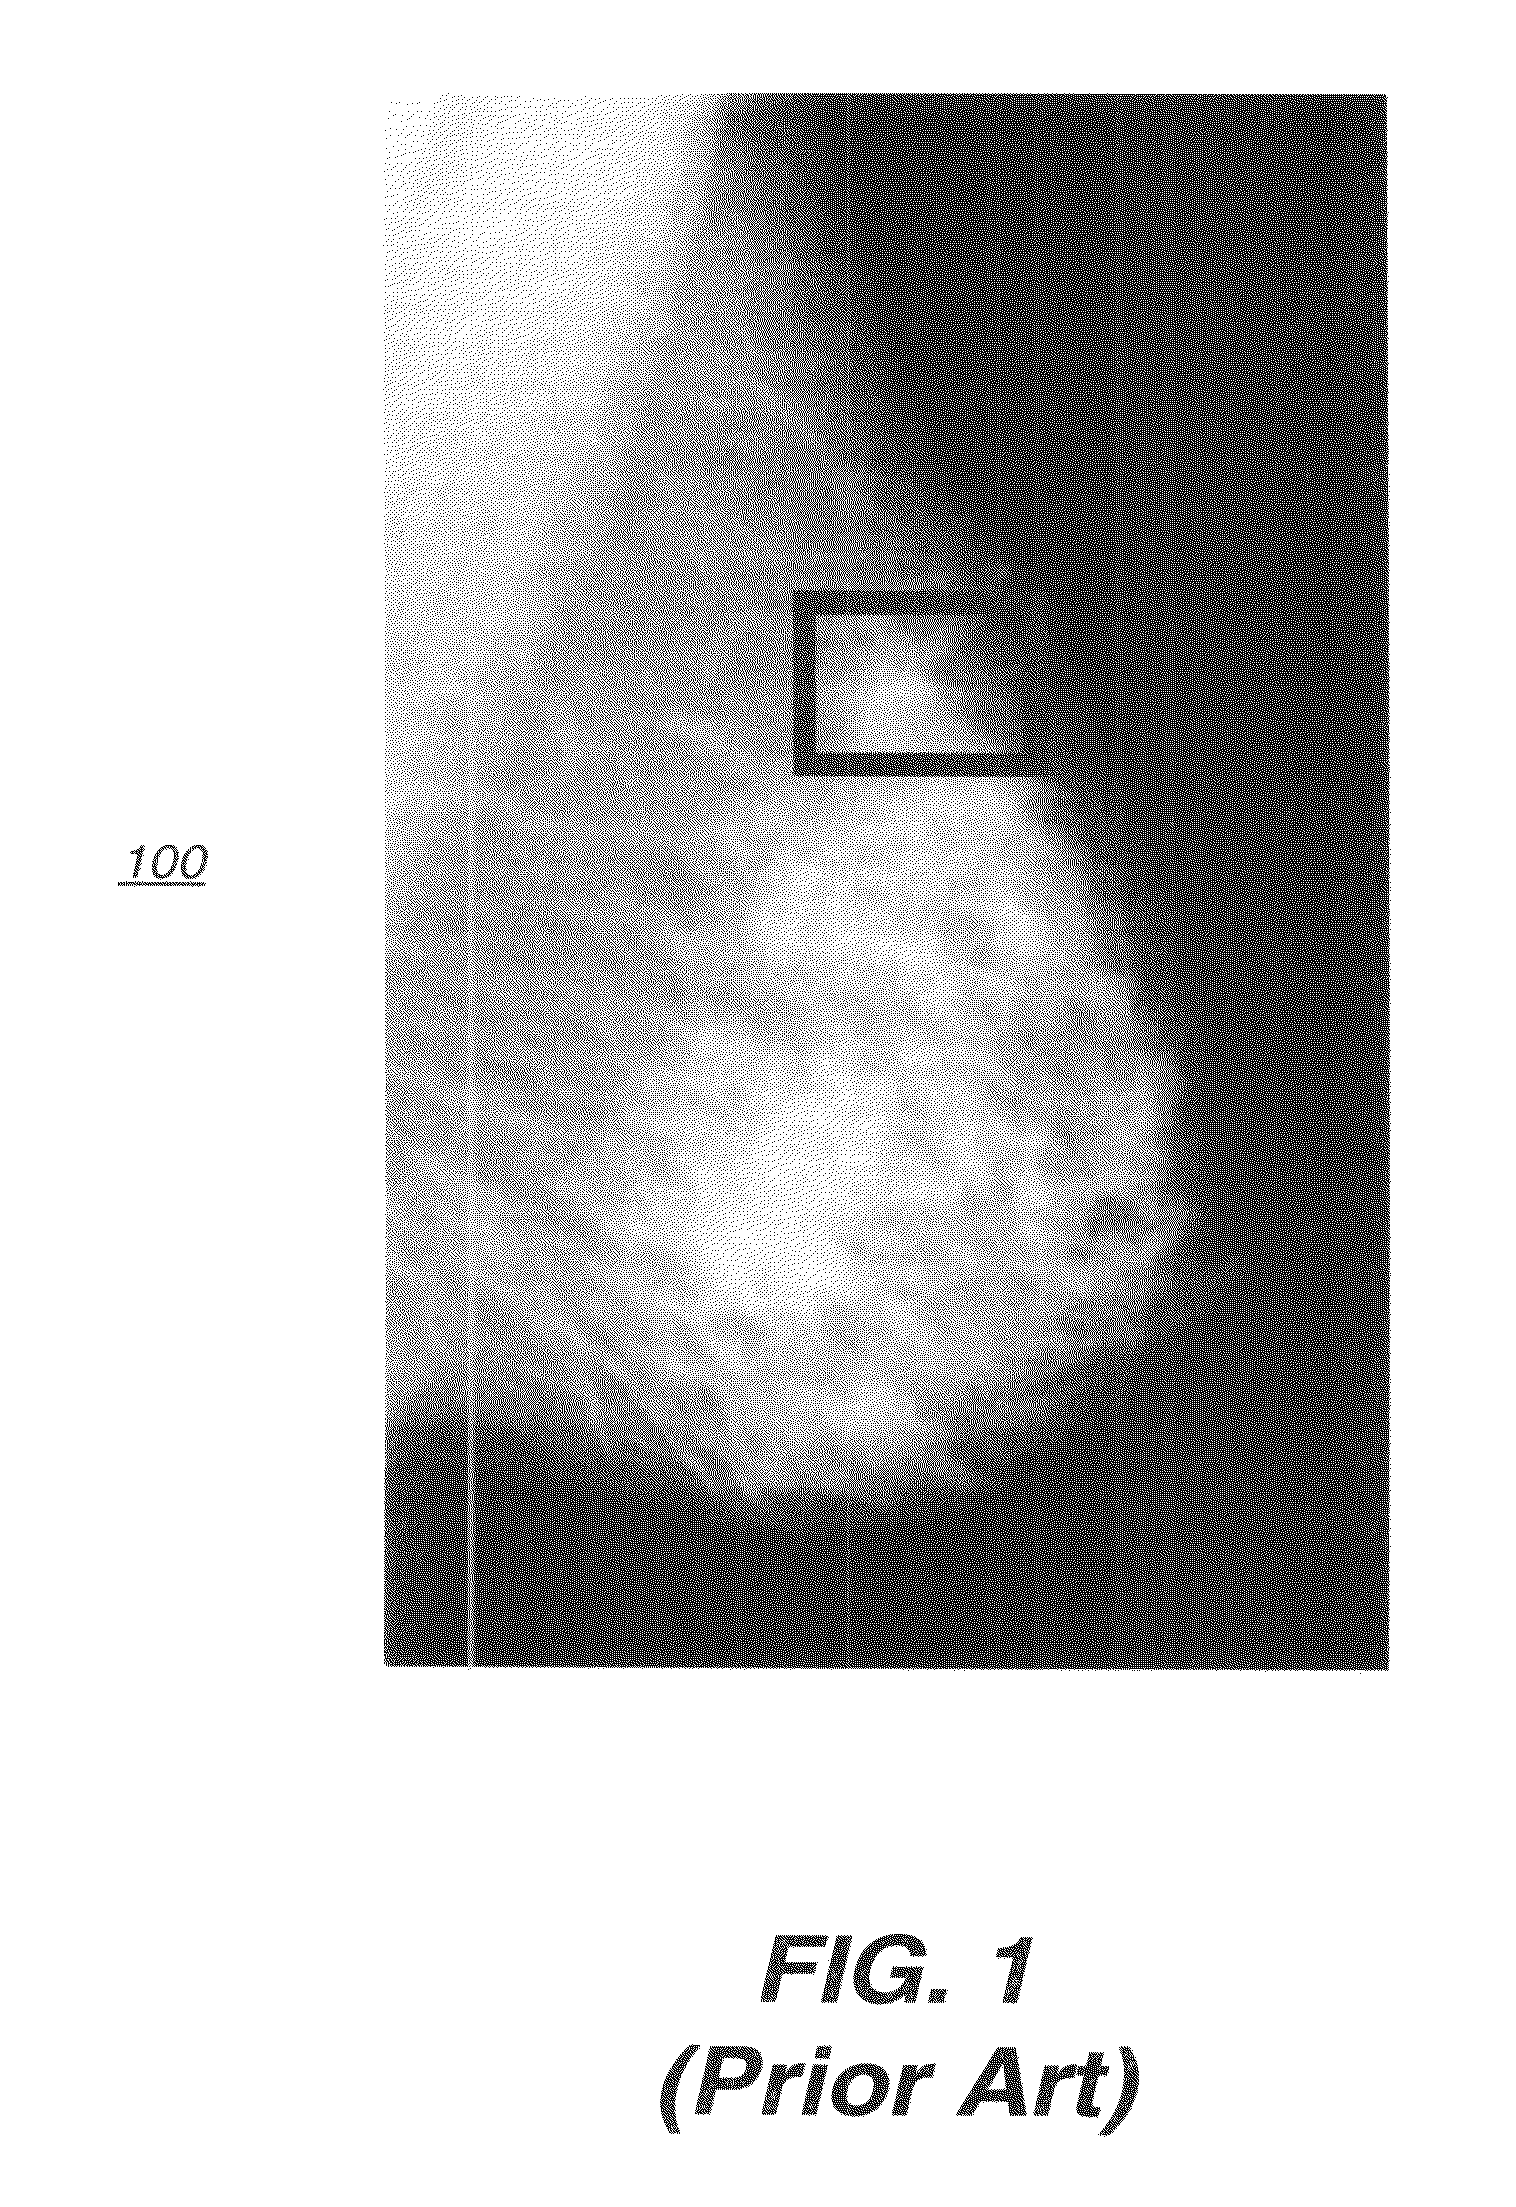 Computer aided detection of architectural distortion in mammography